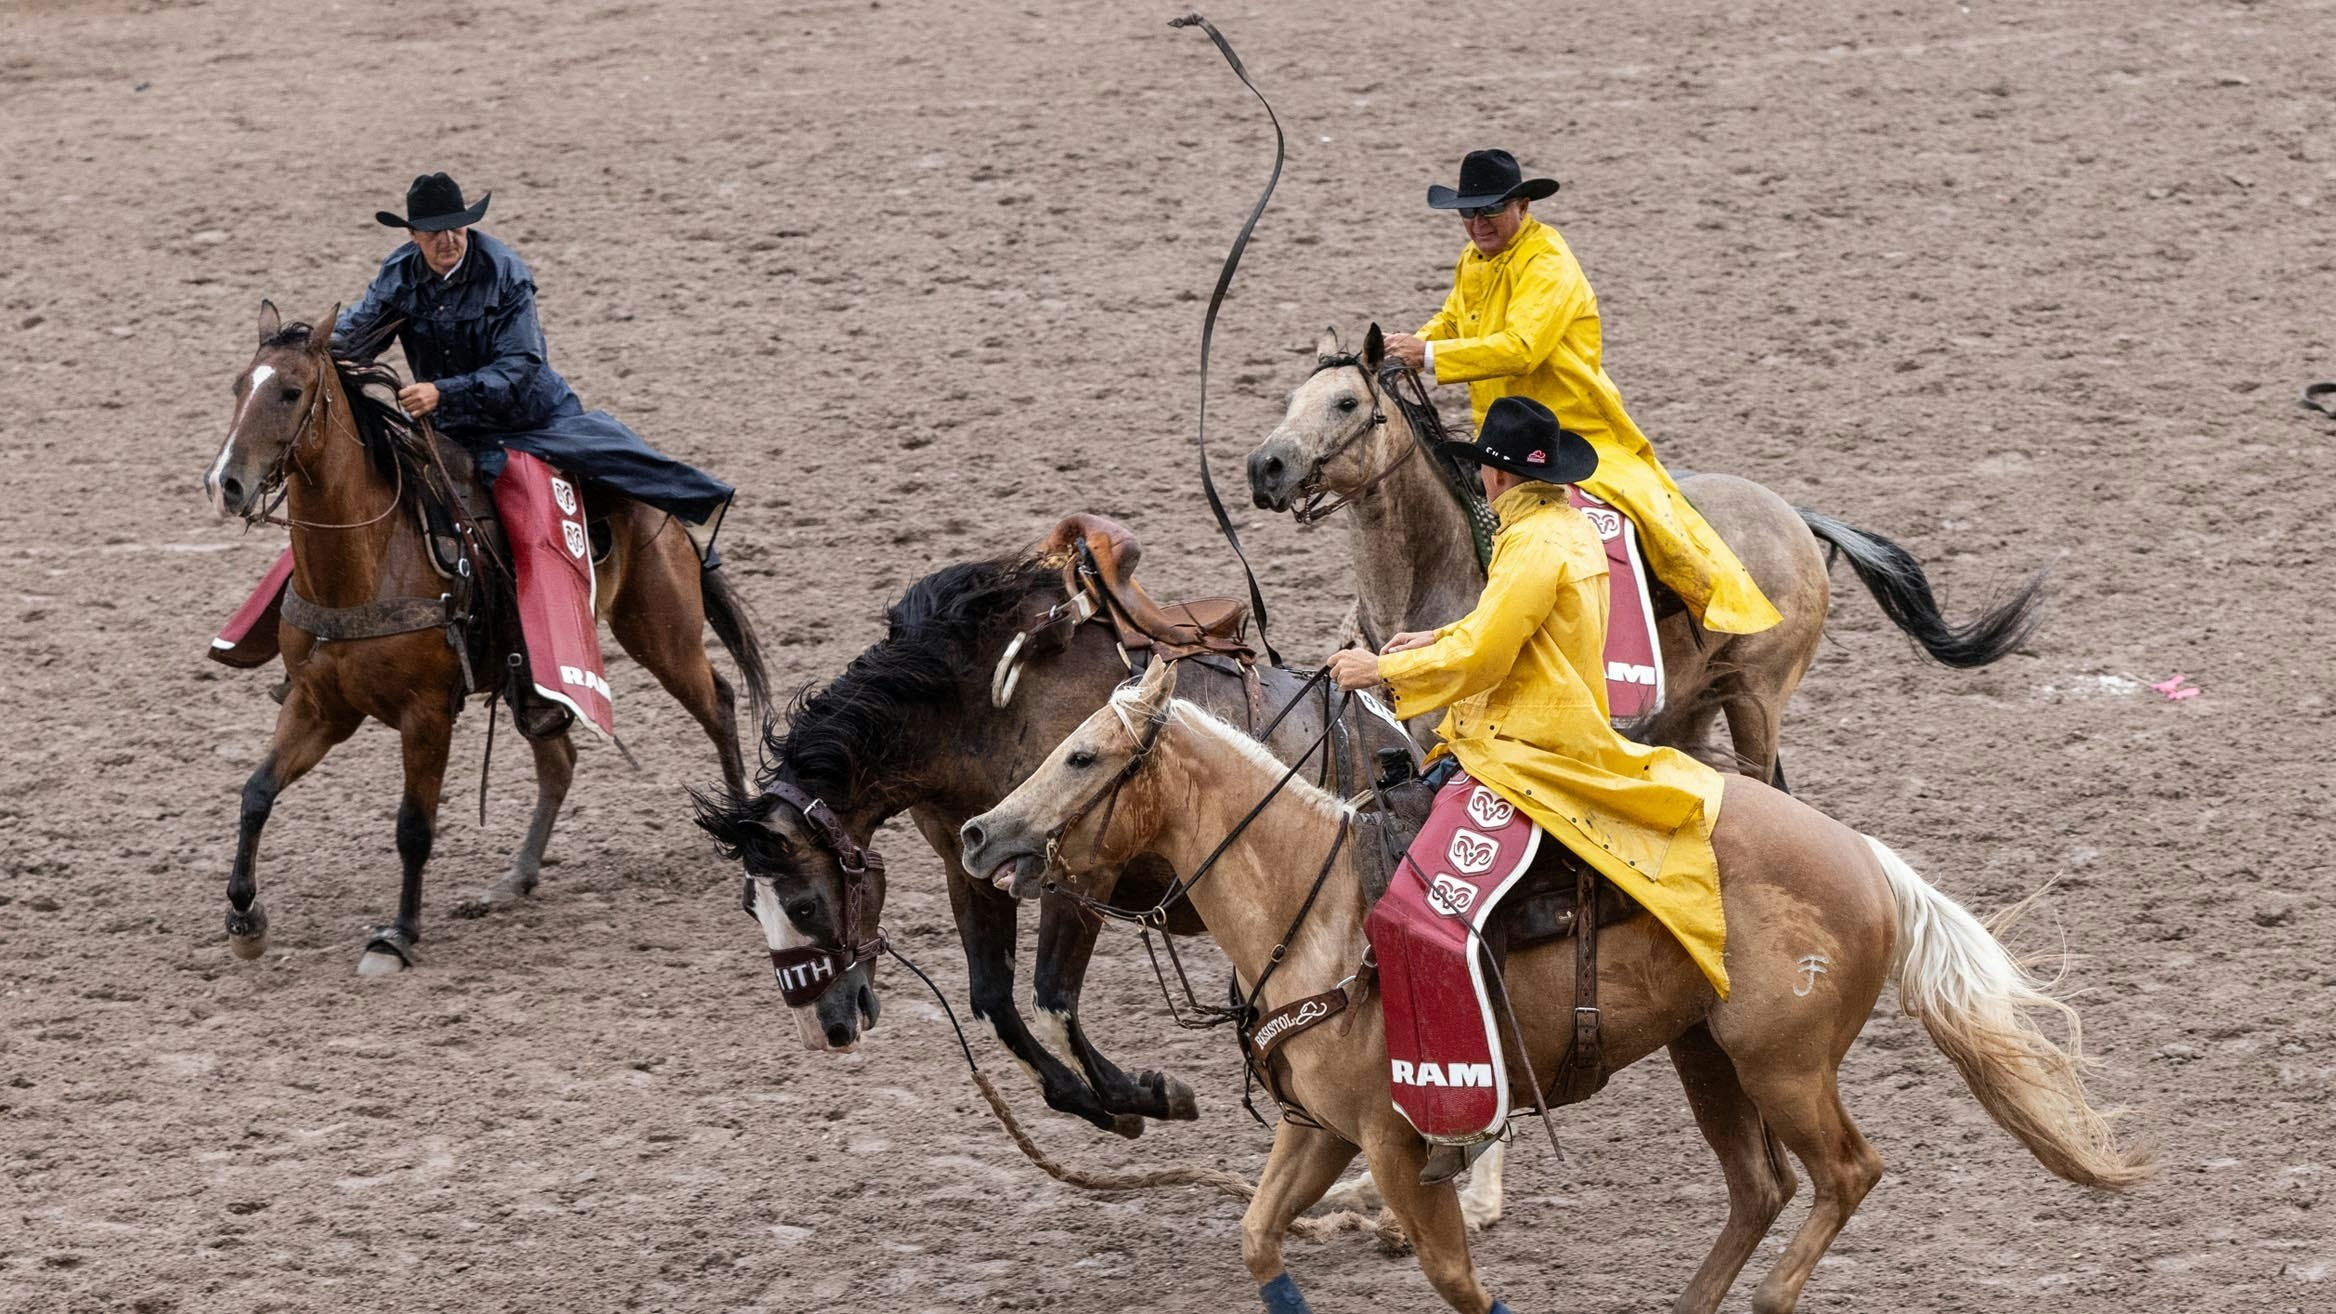 Pickup men run to a saddle bronc horse to release the flank strap during the Rookie Bronc Riding at Cheyenne Frontier Days on July 26, 2023.